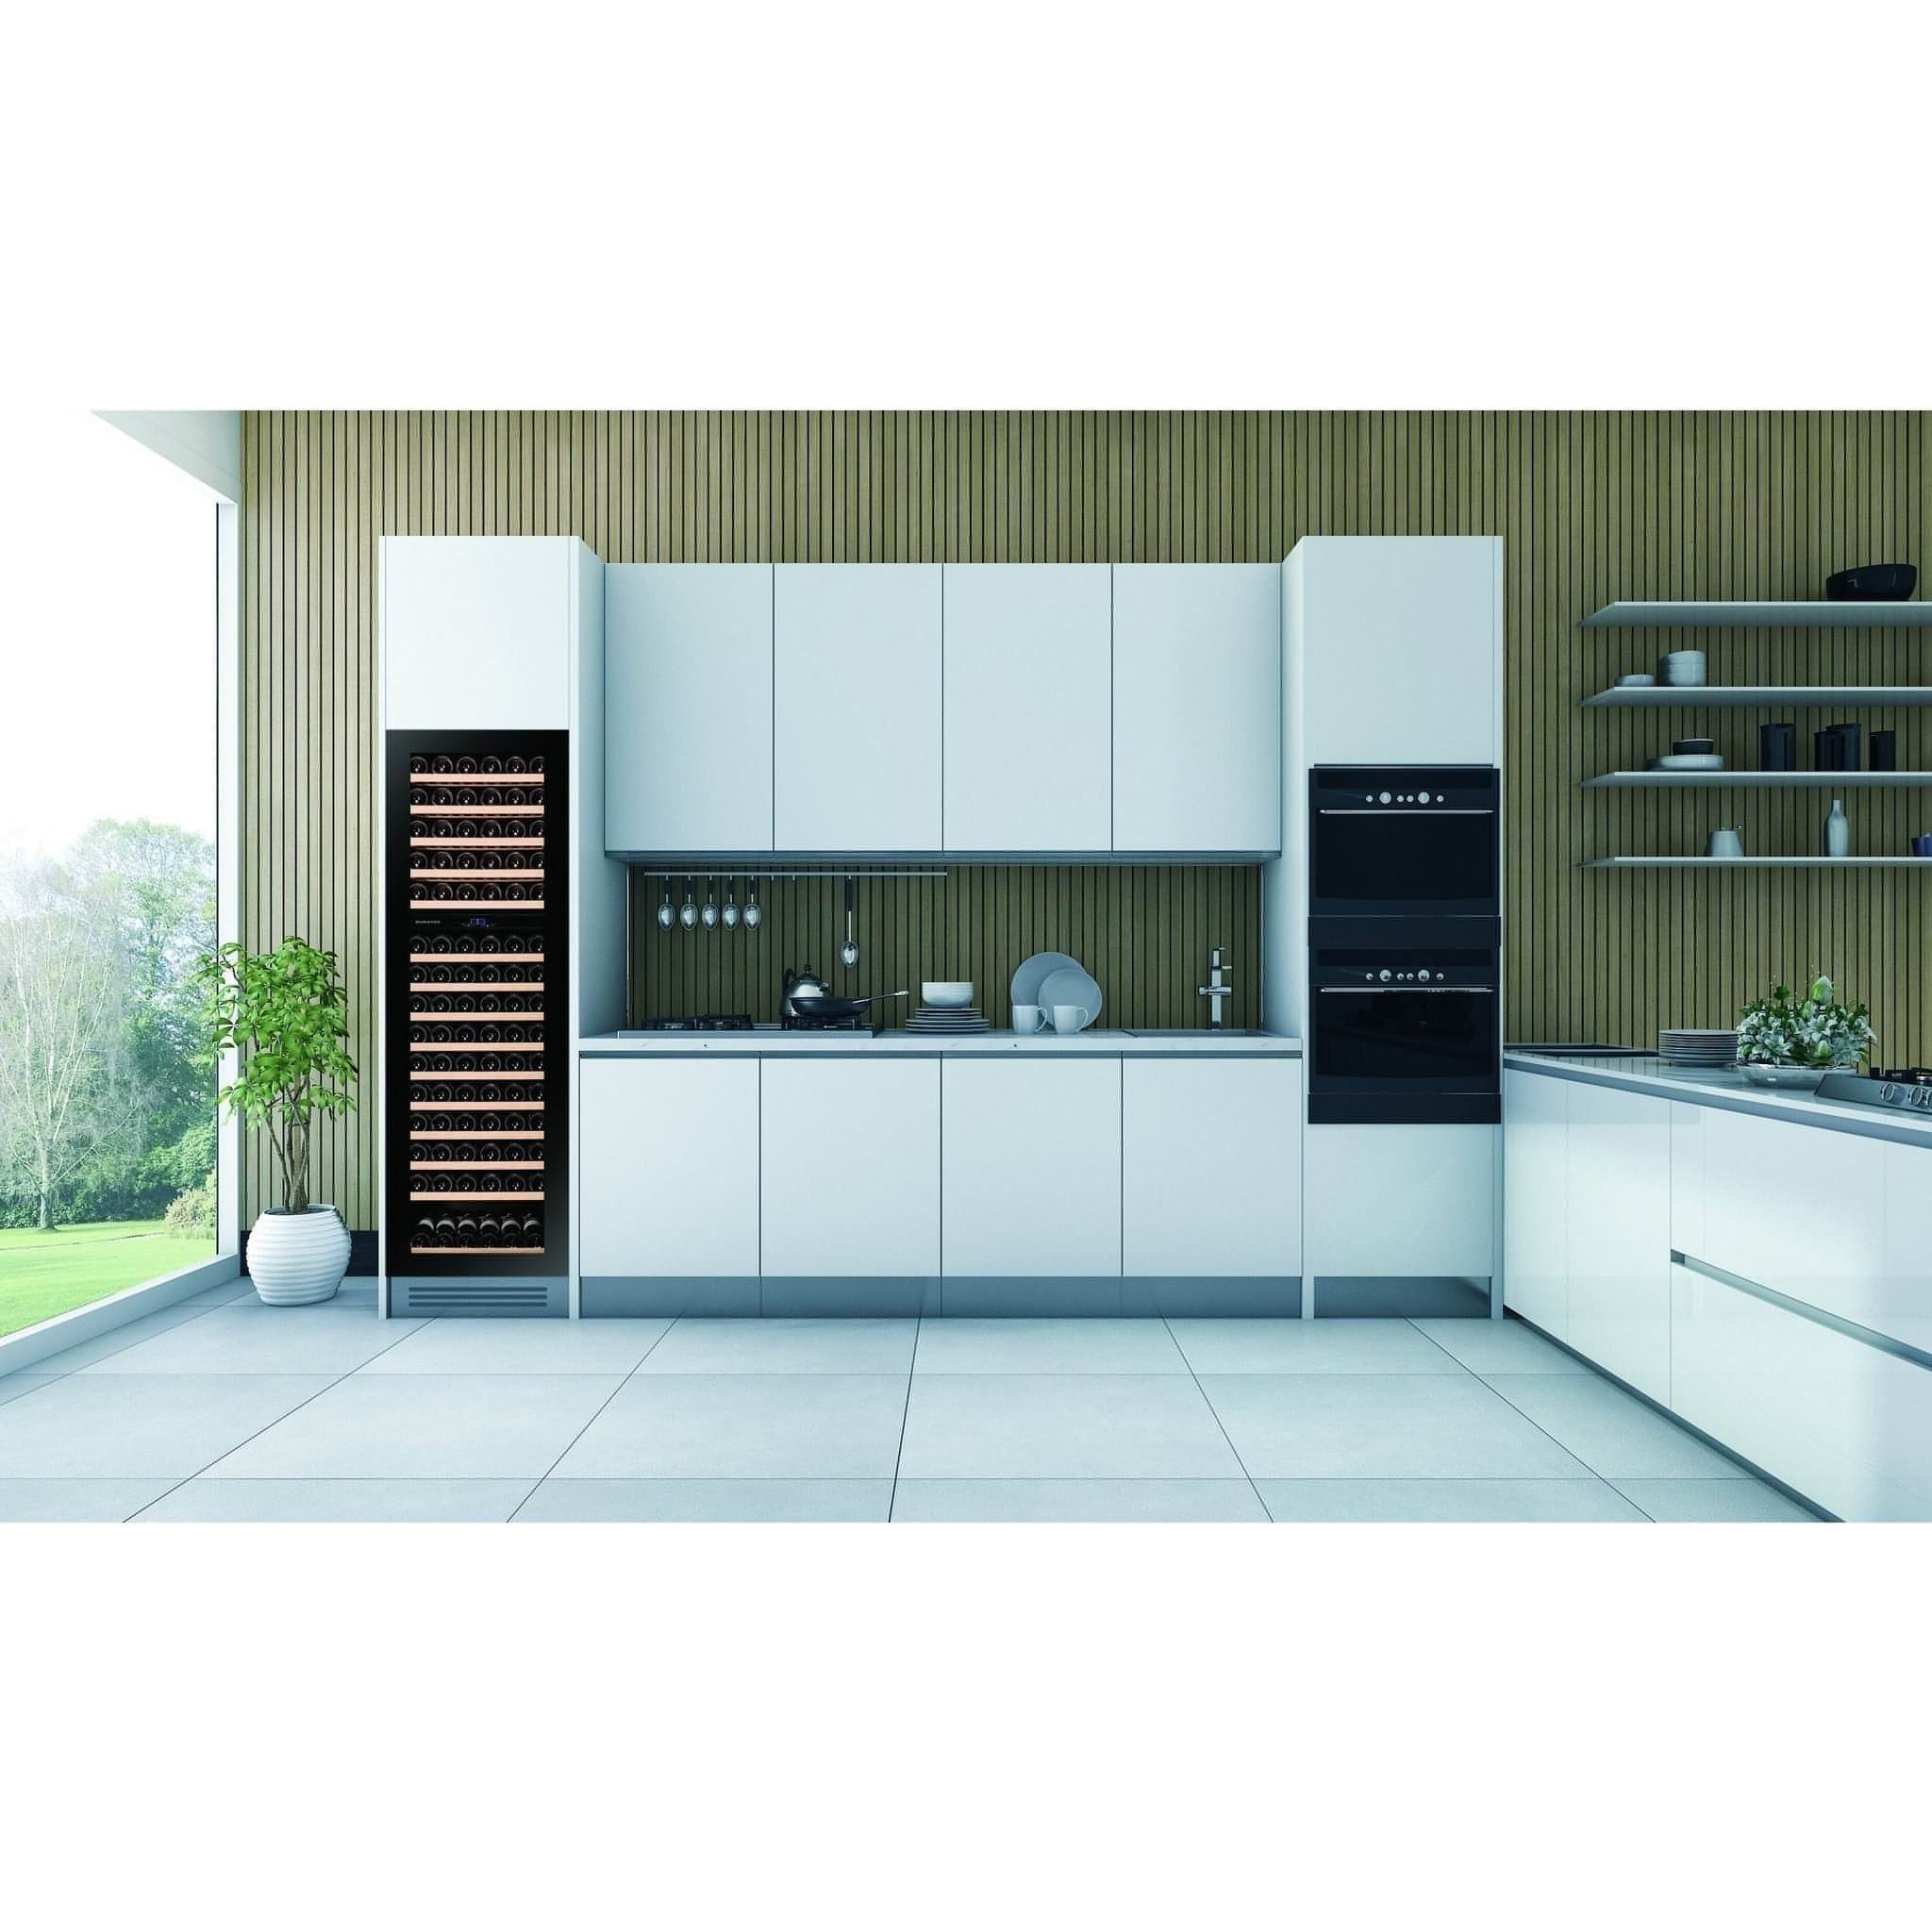 Dunavox GLANCE-114 - Dual Zone 114 Bottle - Integrated Wine Cooler - DAVG-114.288DSS.TO